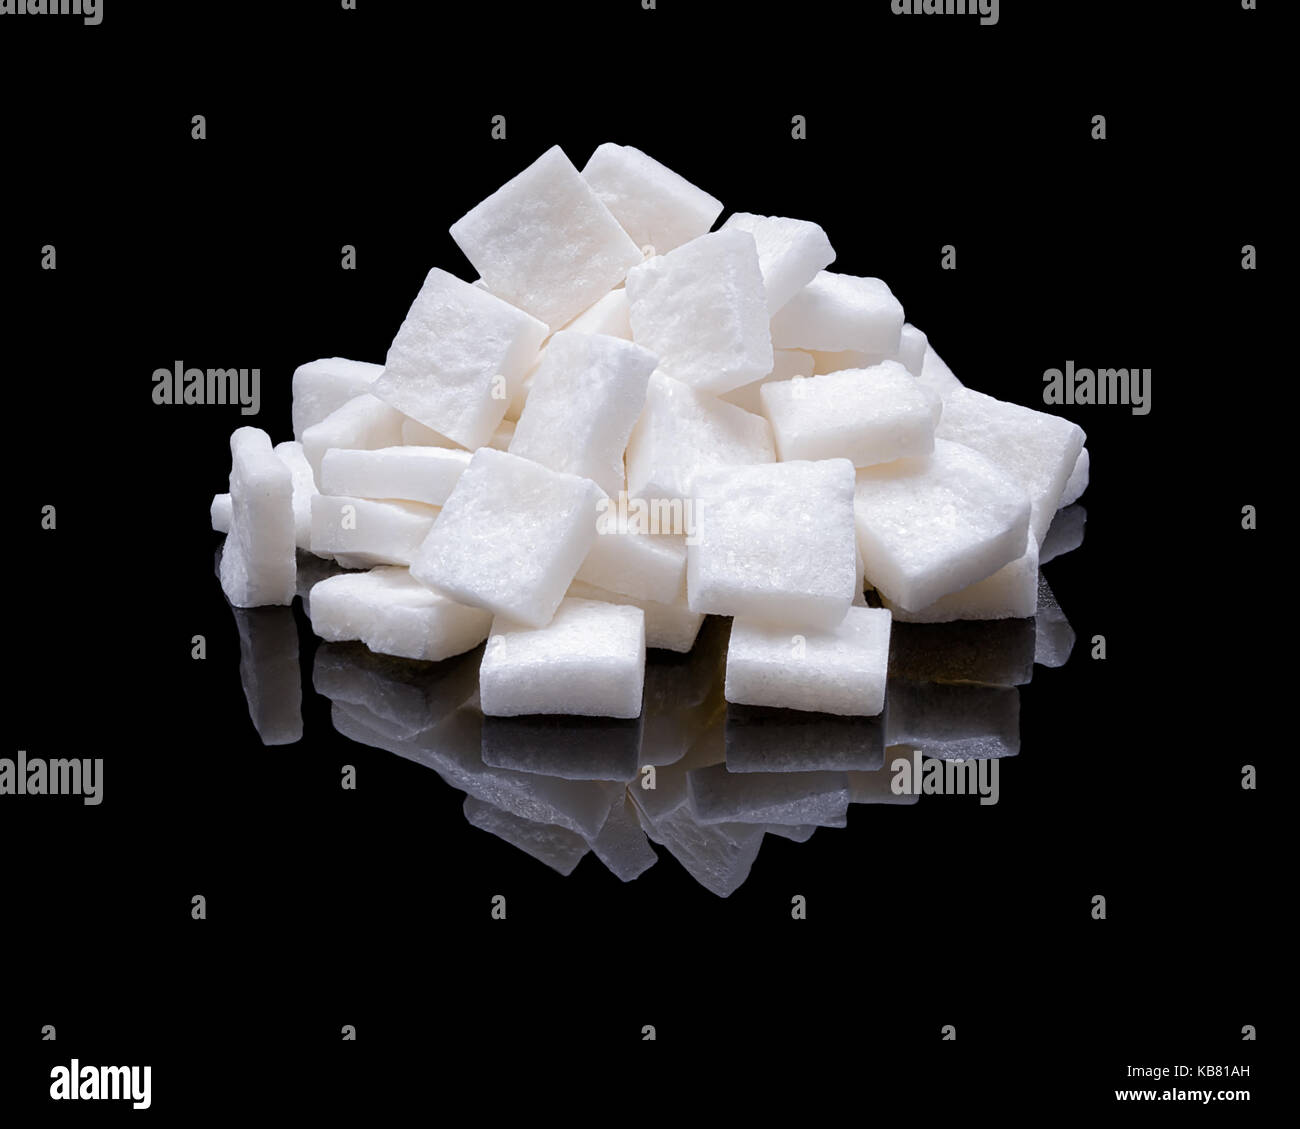 Pile of lumpy white cane sugar with real reflection on a black glossy background Stock Photo